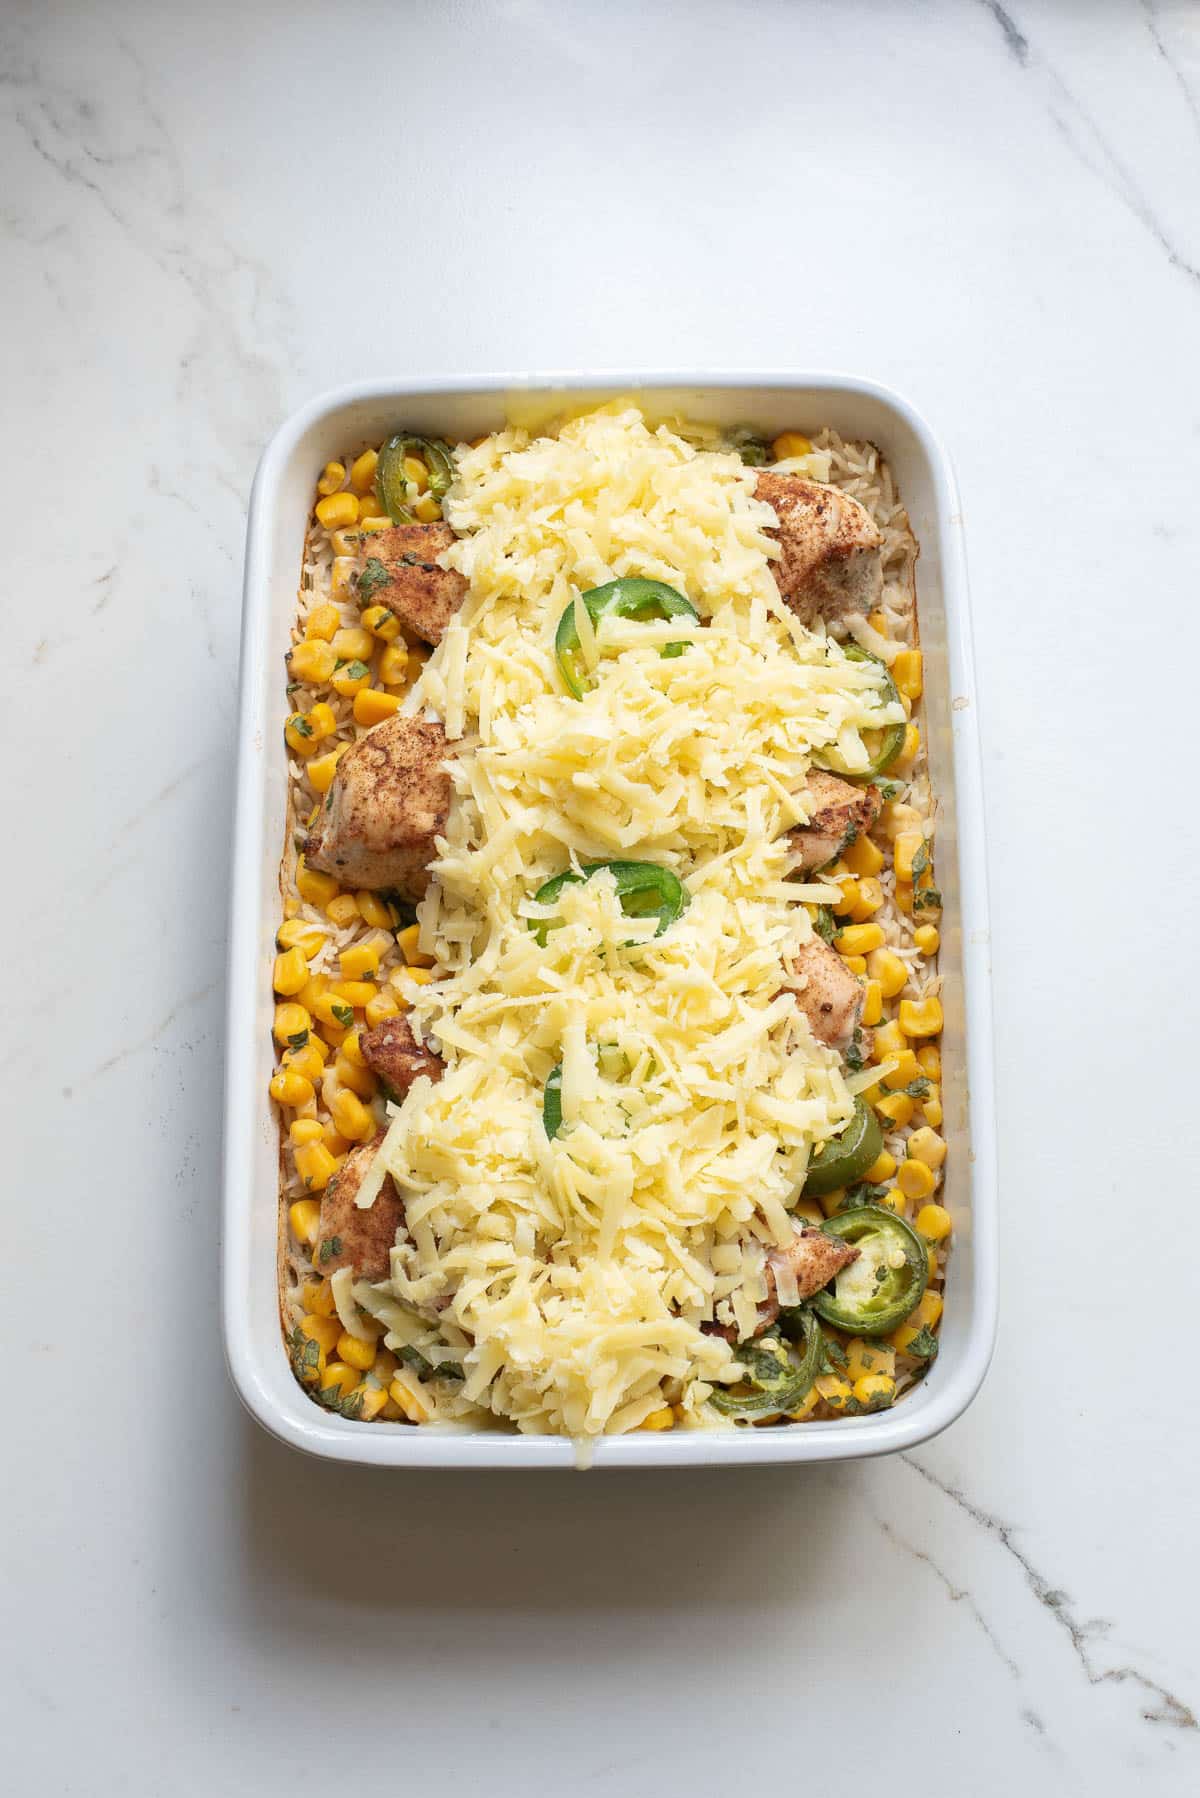 Chicken casserole topped with shredded cheese.